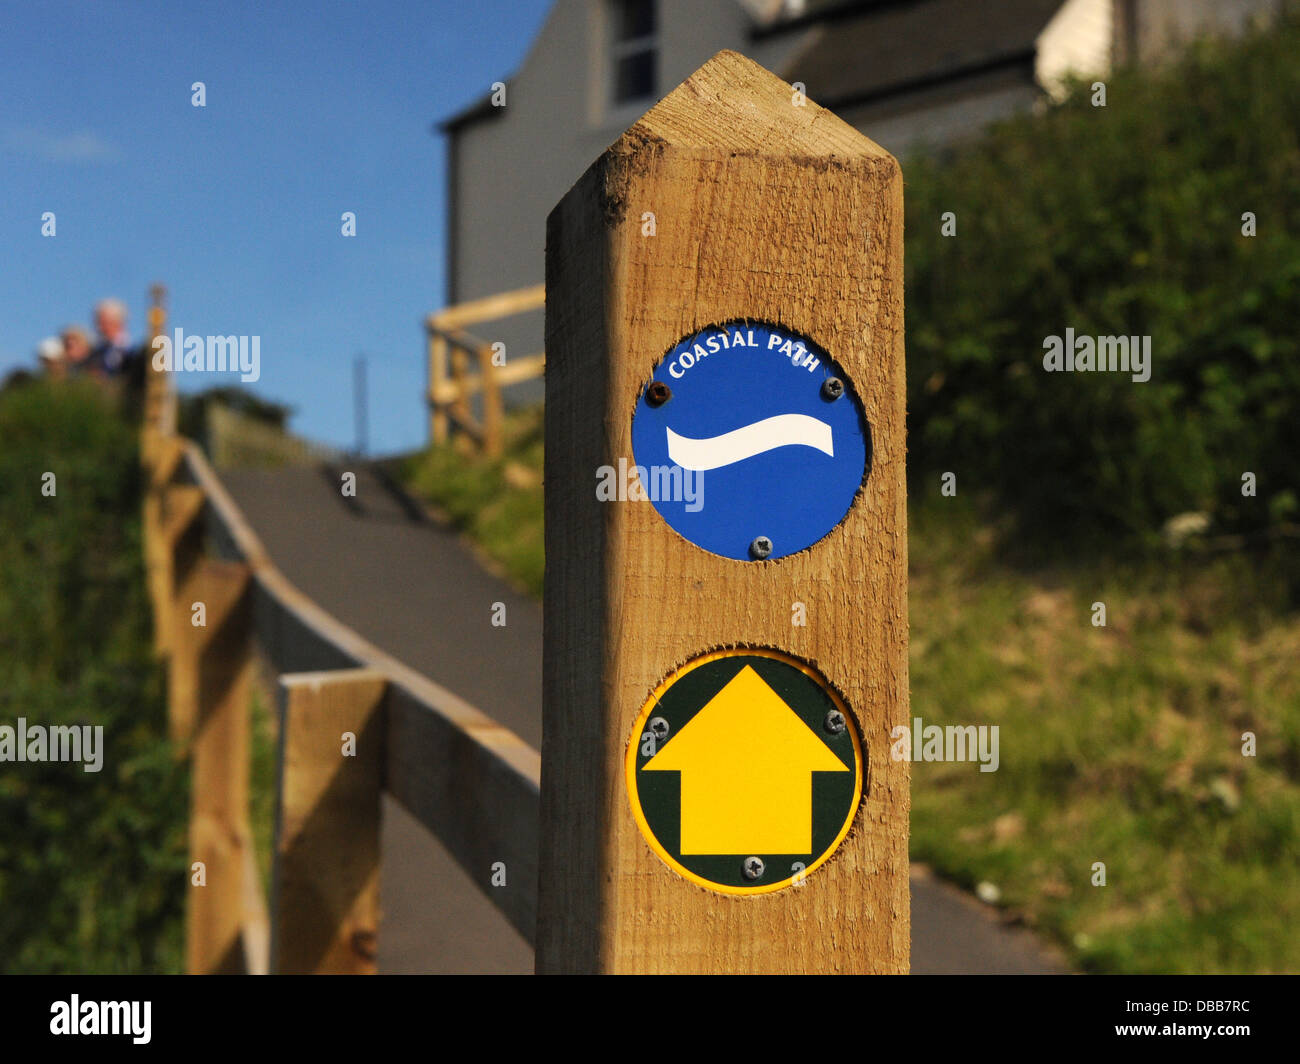 A coastal path sign by the seaside. Stock Photo